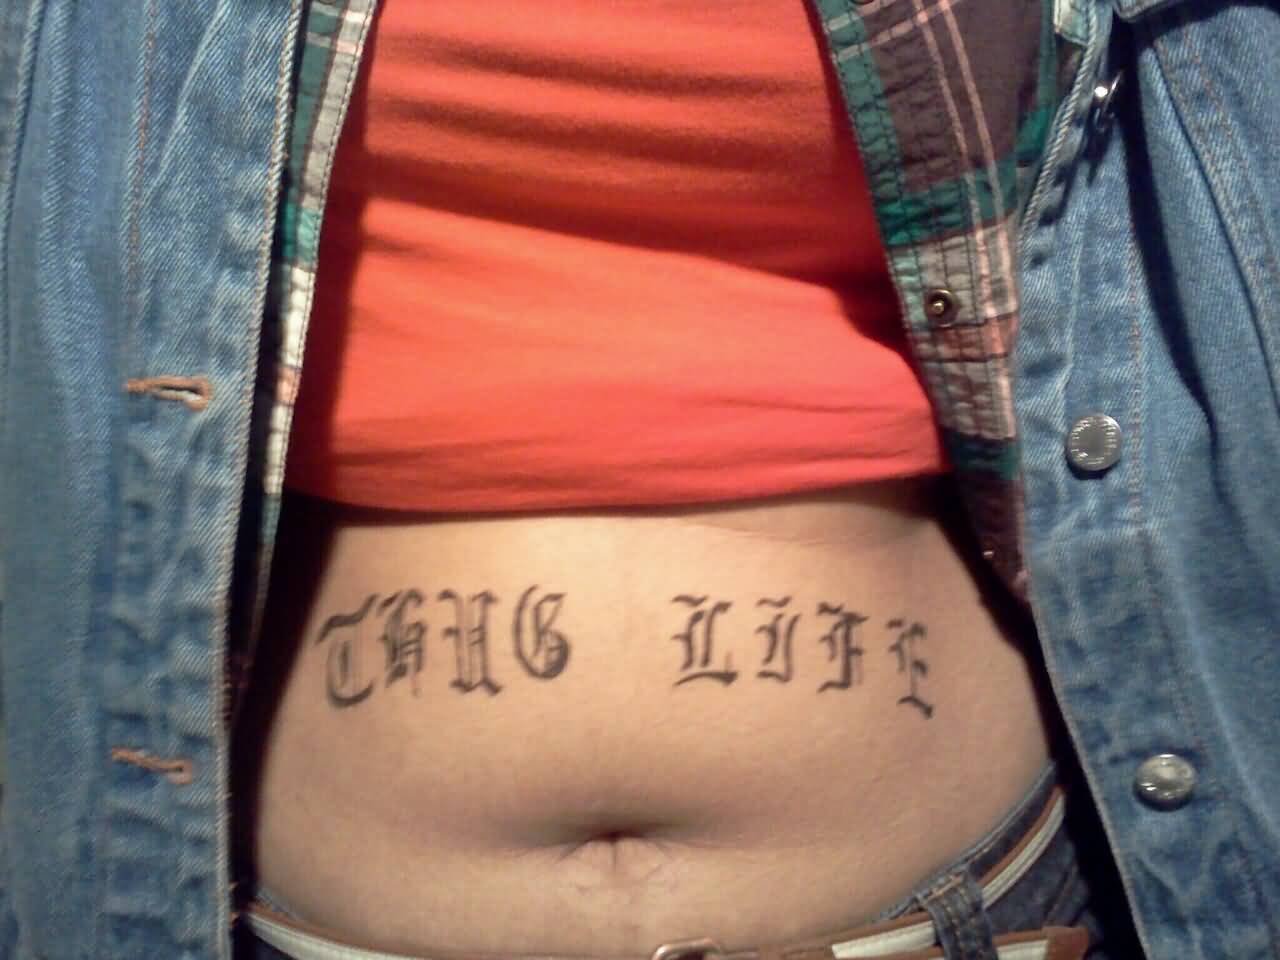 Thug Life Belly Tattoo For Women